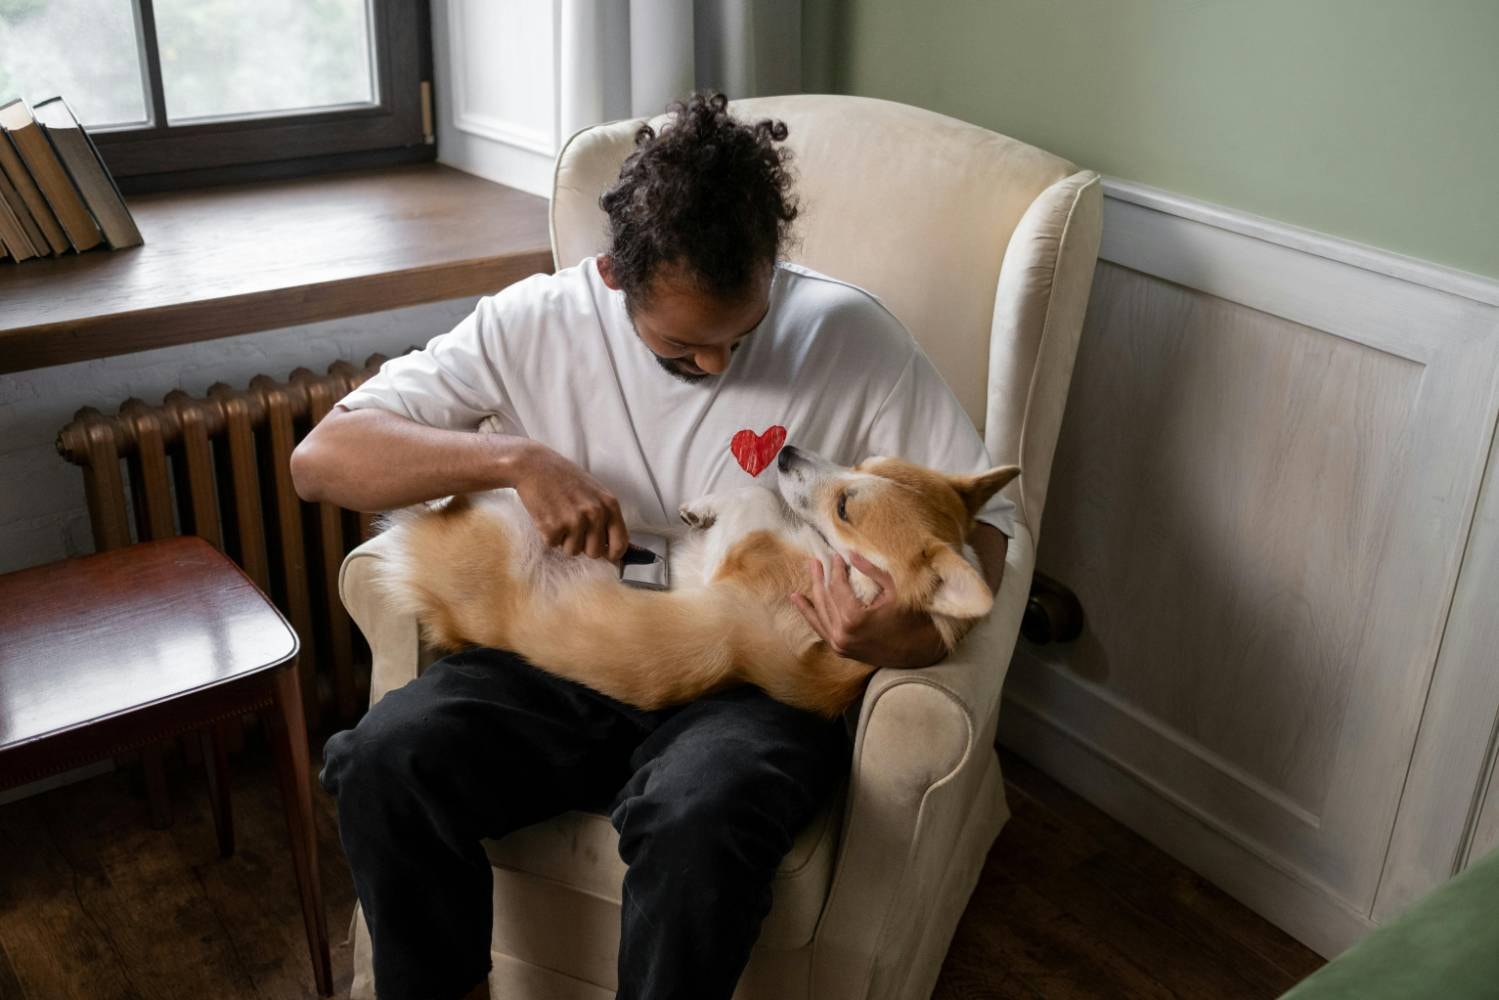 A man is brushing a Corgi while holding it on his lap, leading to the consideration of what to do for itchy dog after grooming